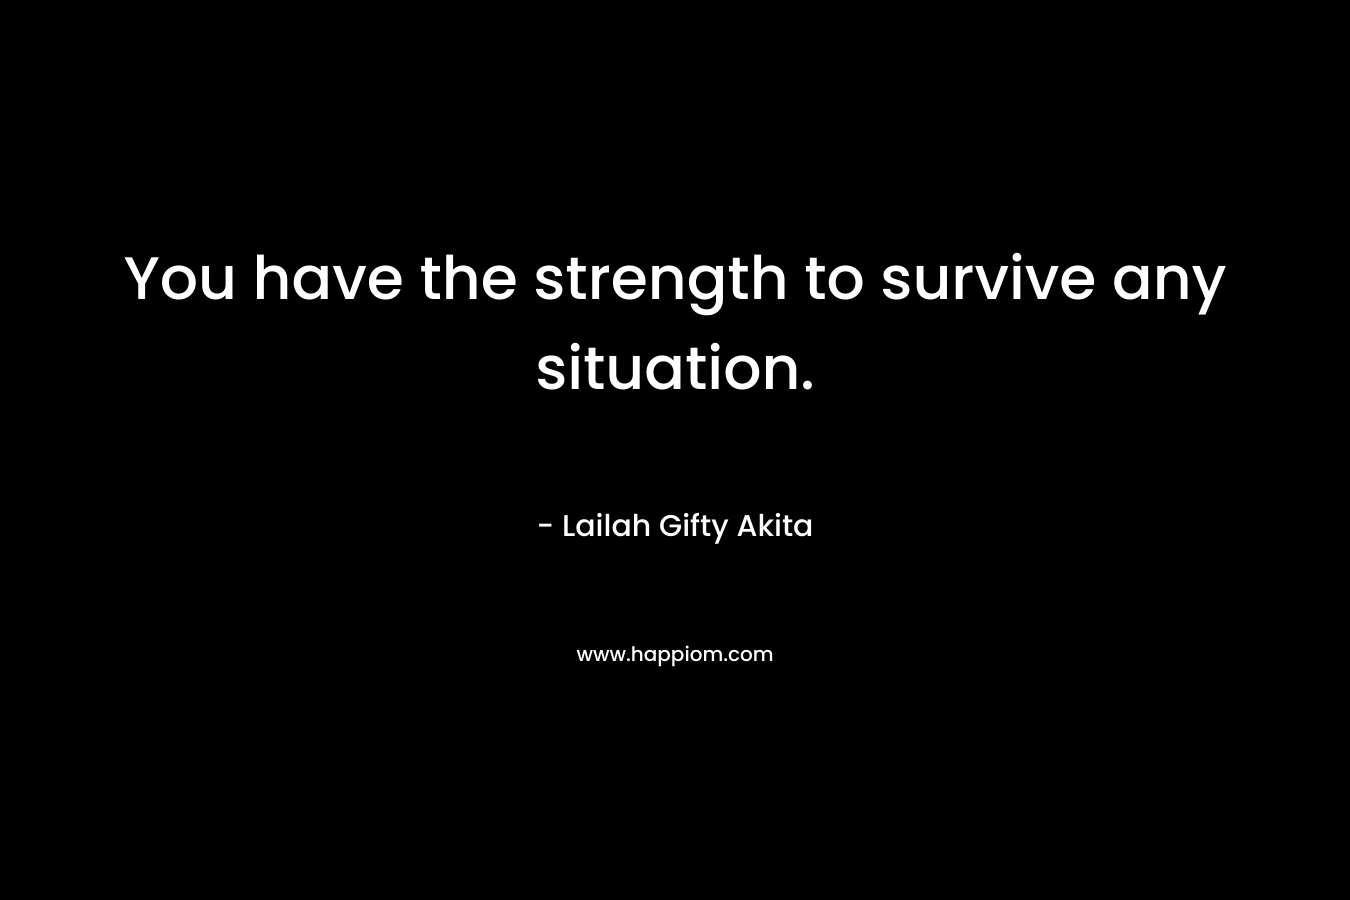 You have the strength to survive any situation.